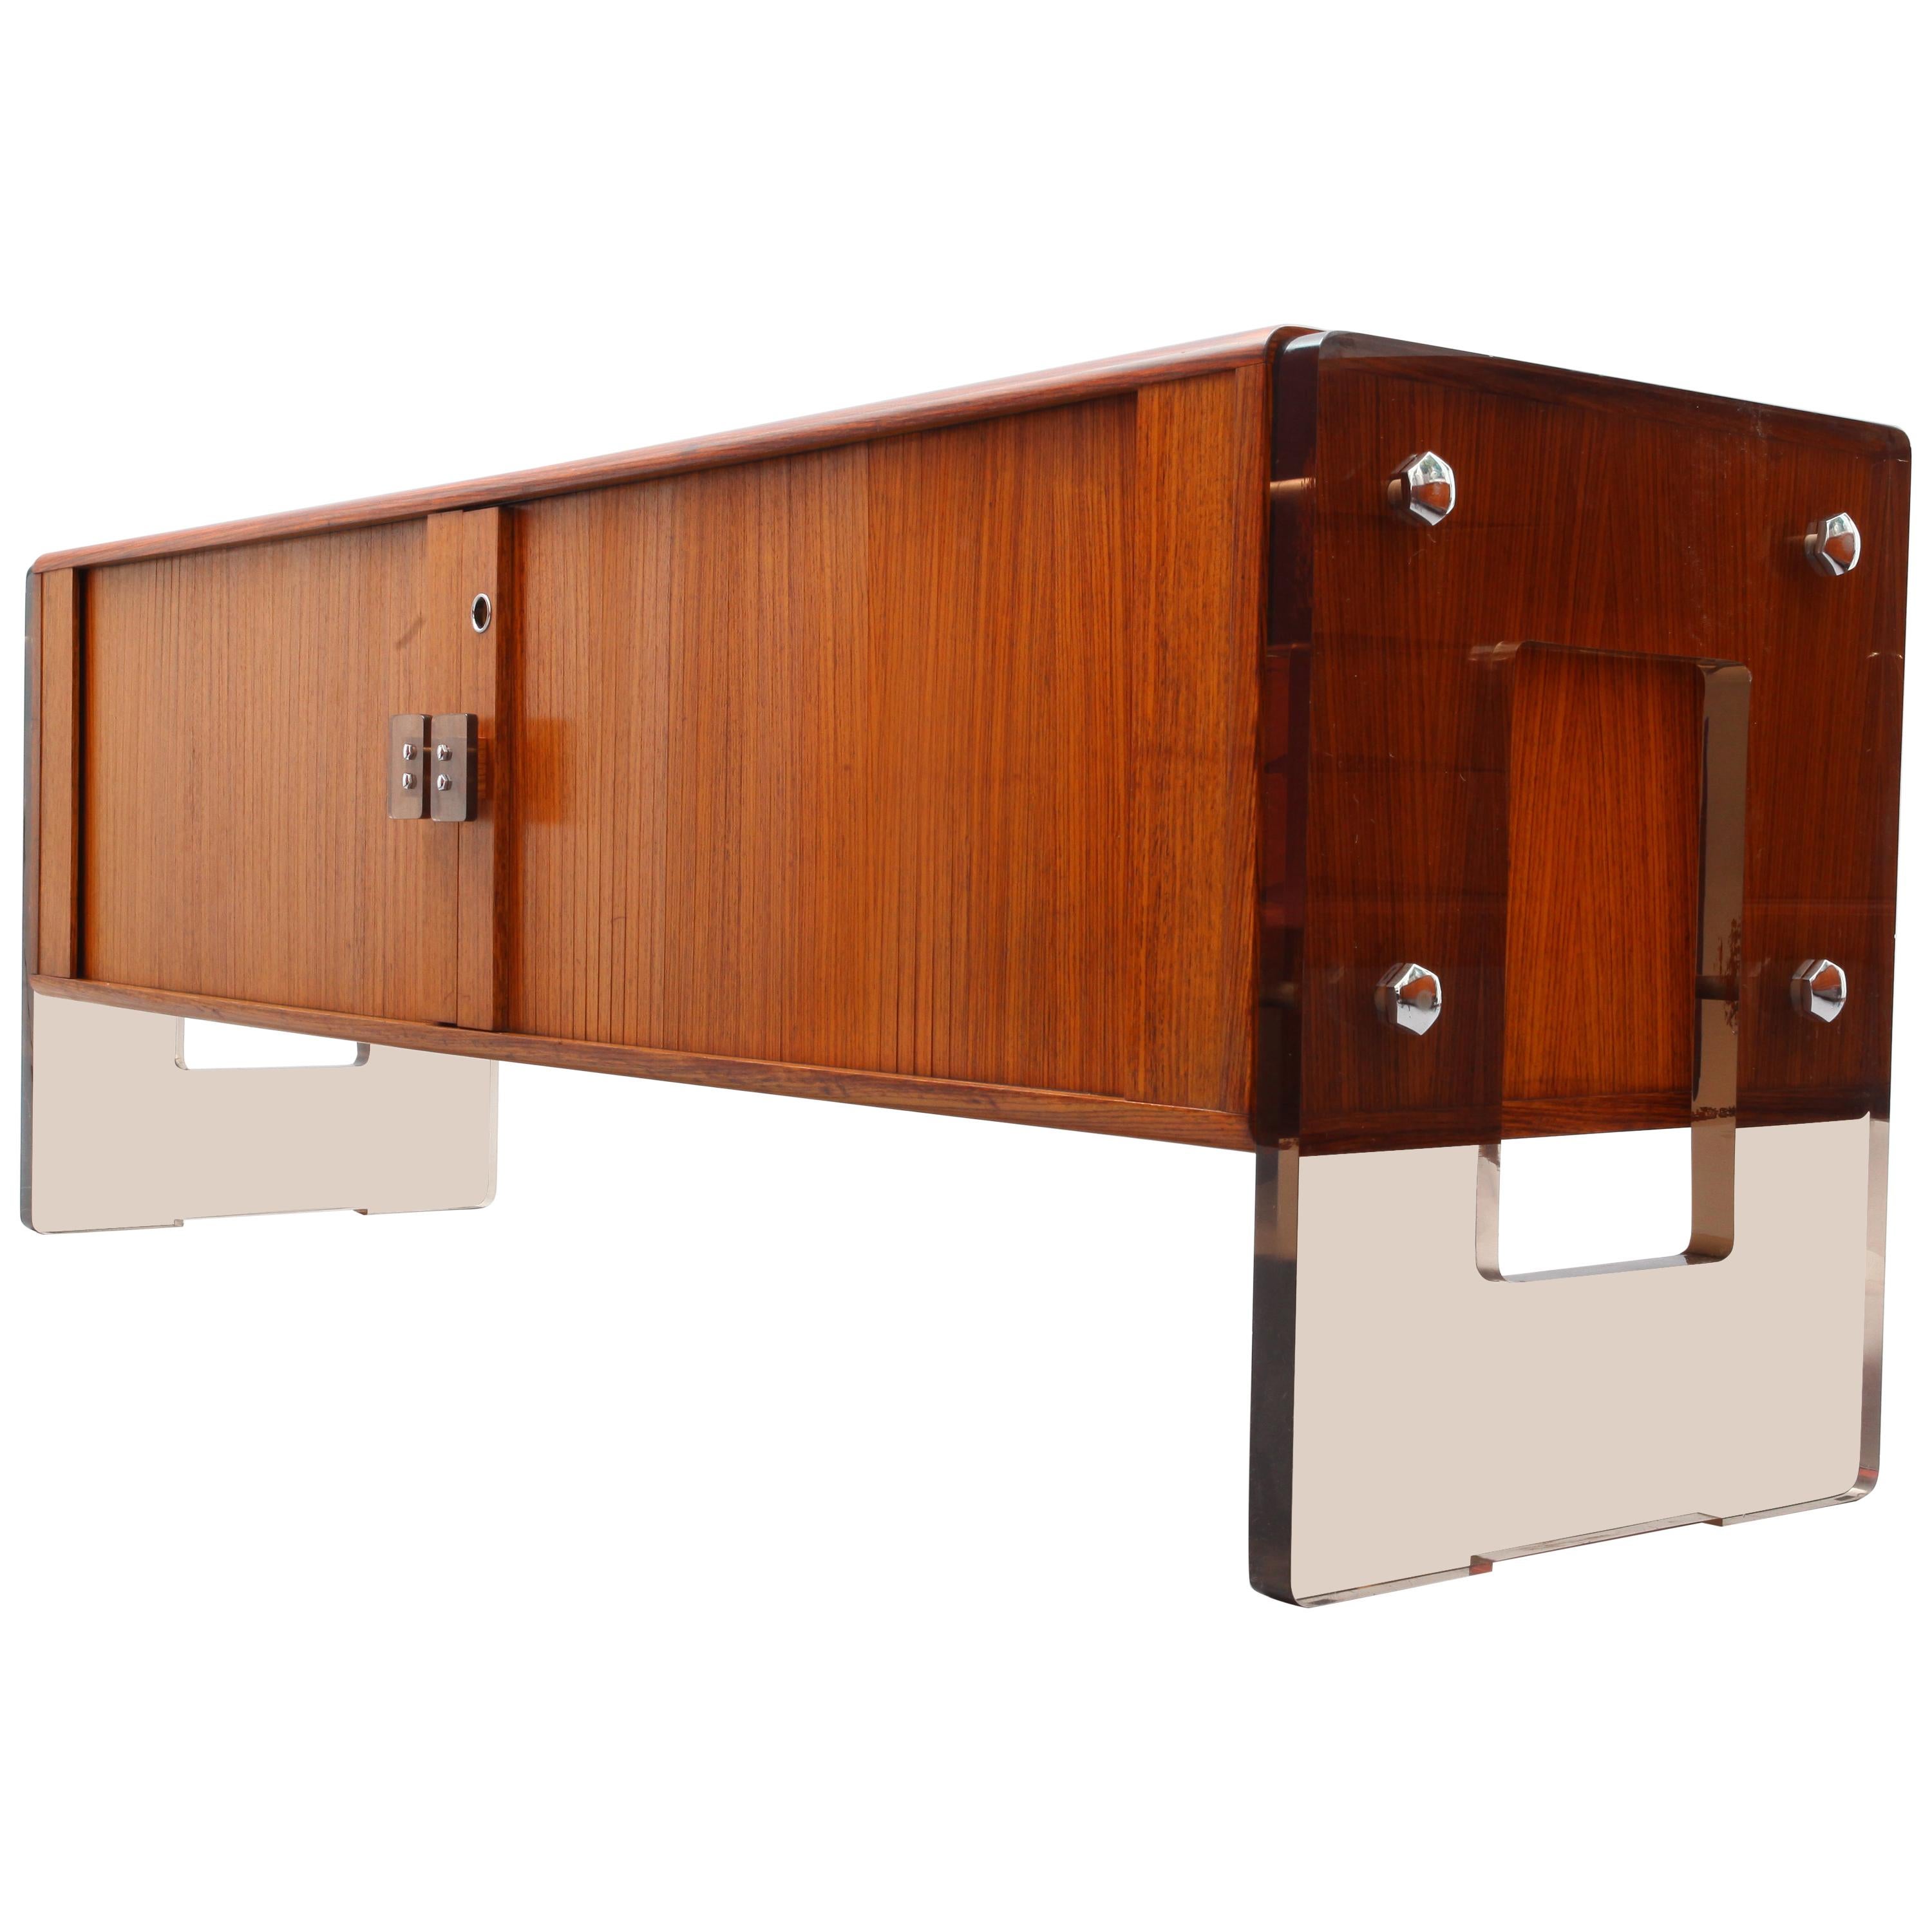 Rare Teak Sideboard with Smoke Lucite Side Parts and Sliding Tambour Doors